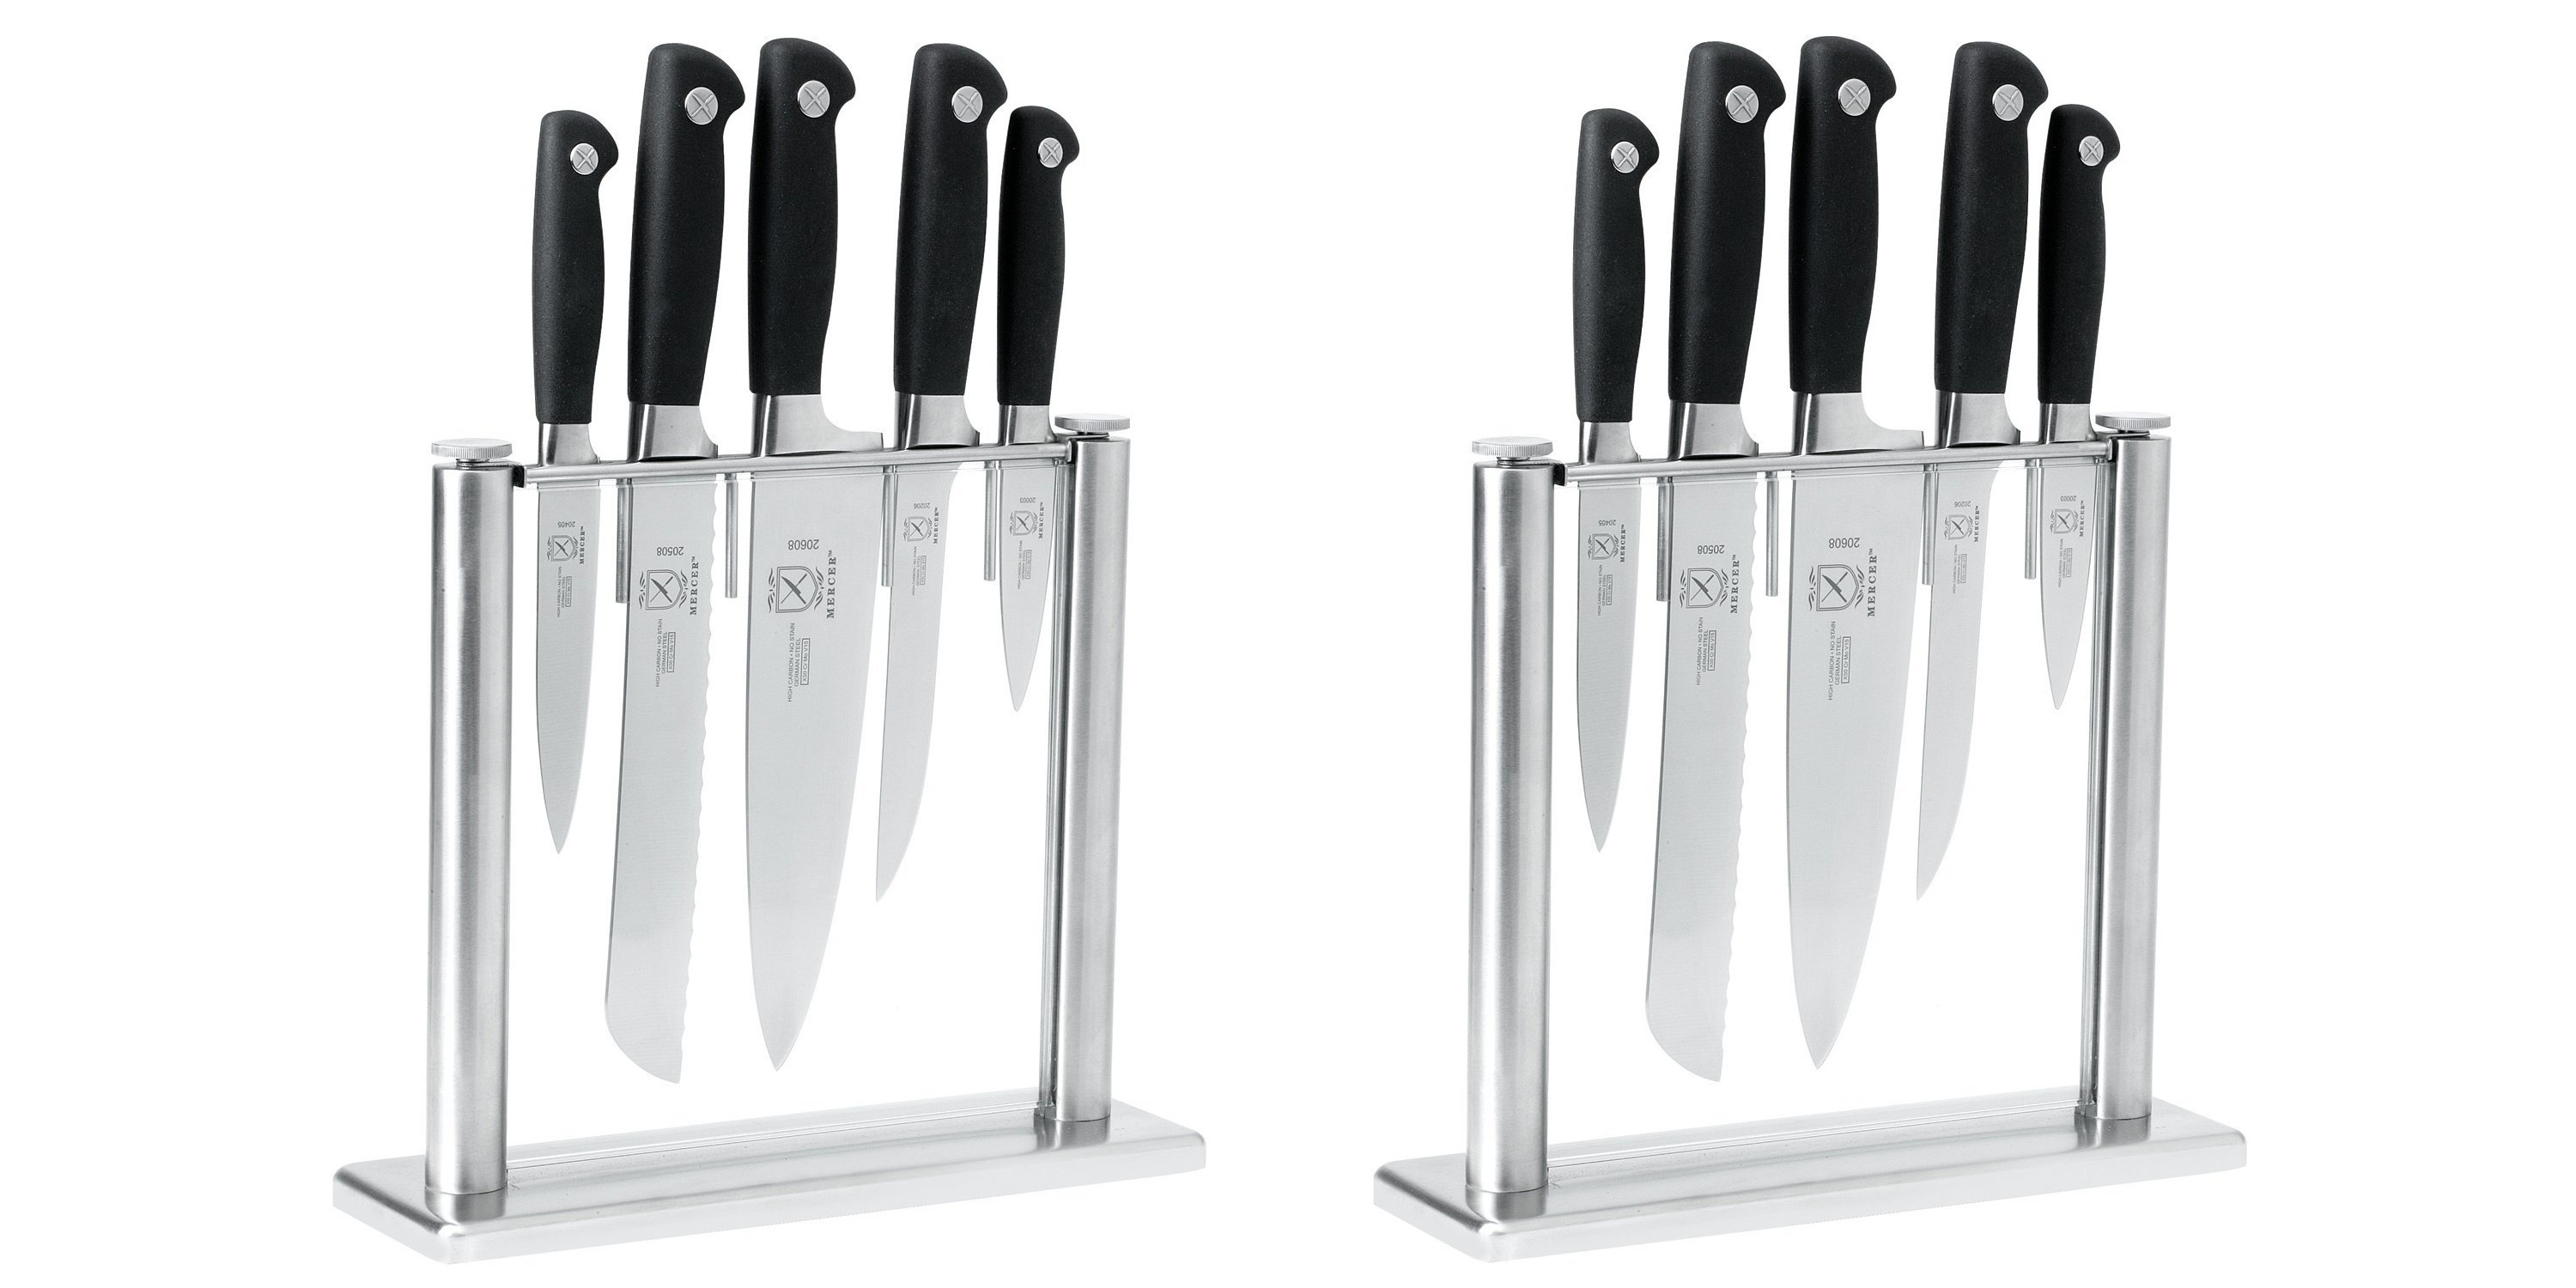 https://9to5toys.com/wp-content/uploads/sites/5/2016/06/mercer-culinary-genesis-6-piece-forged-knife-set-sale-02.jpg